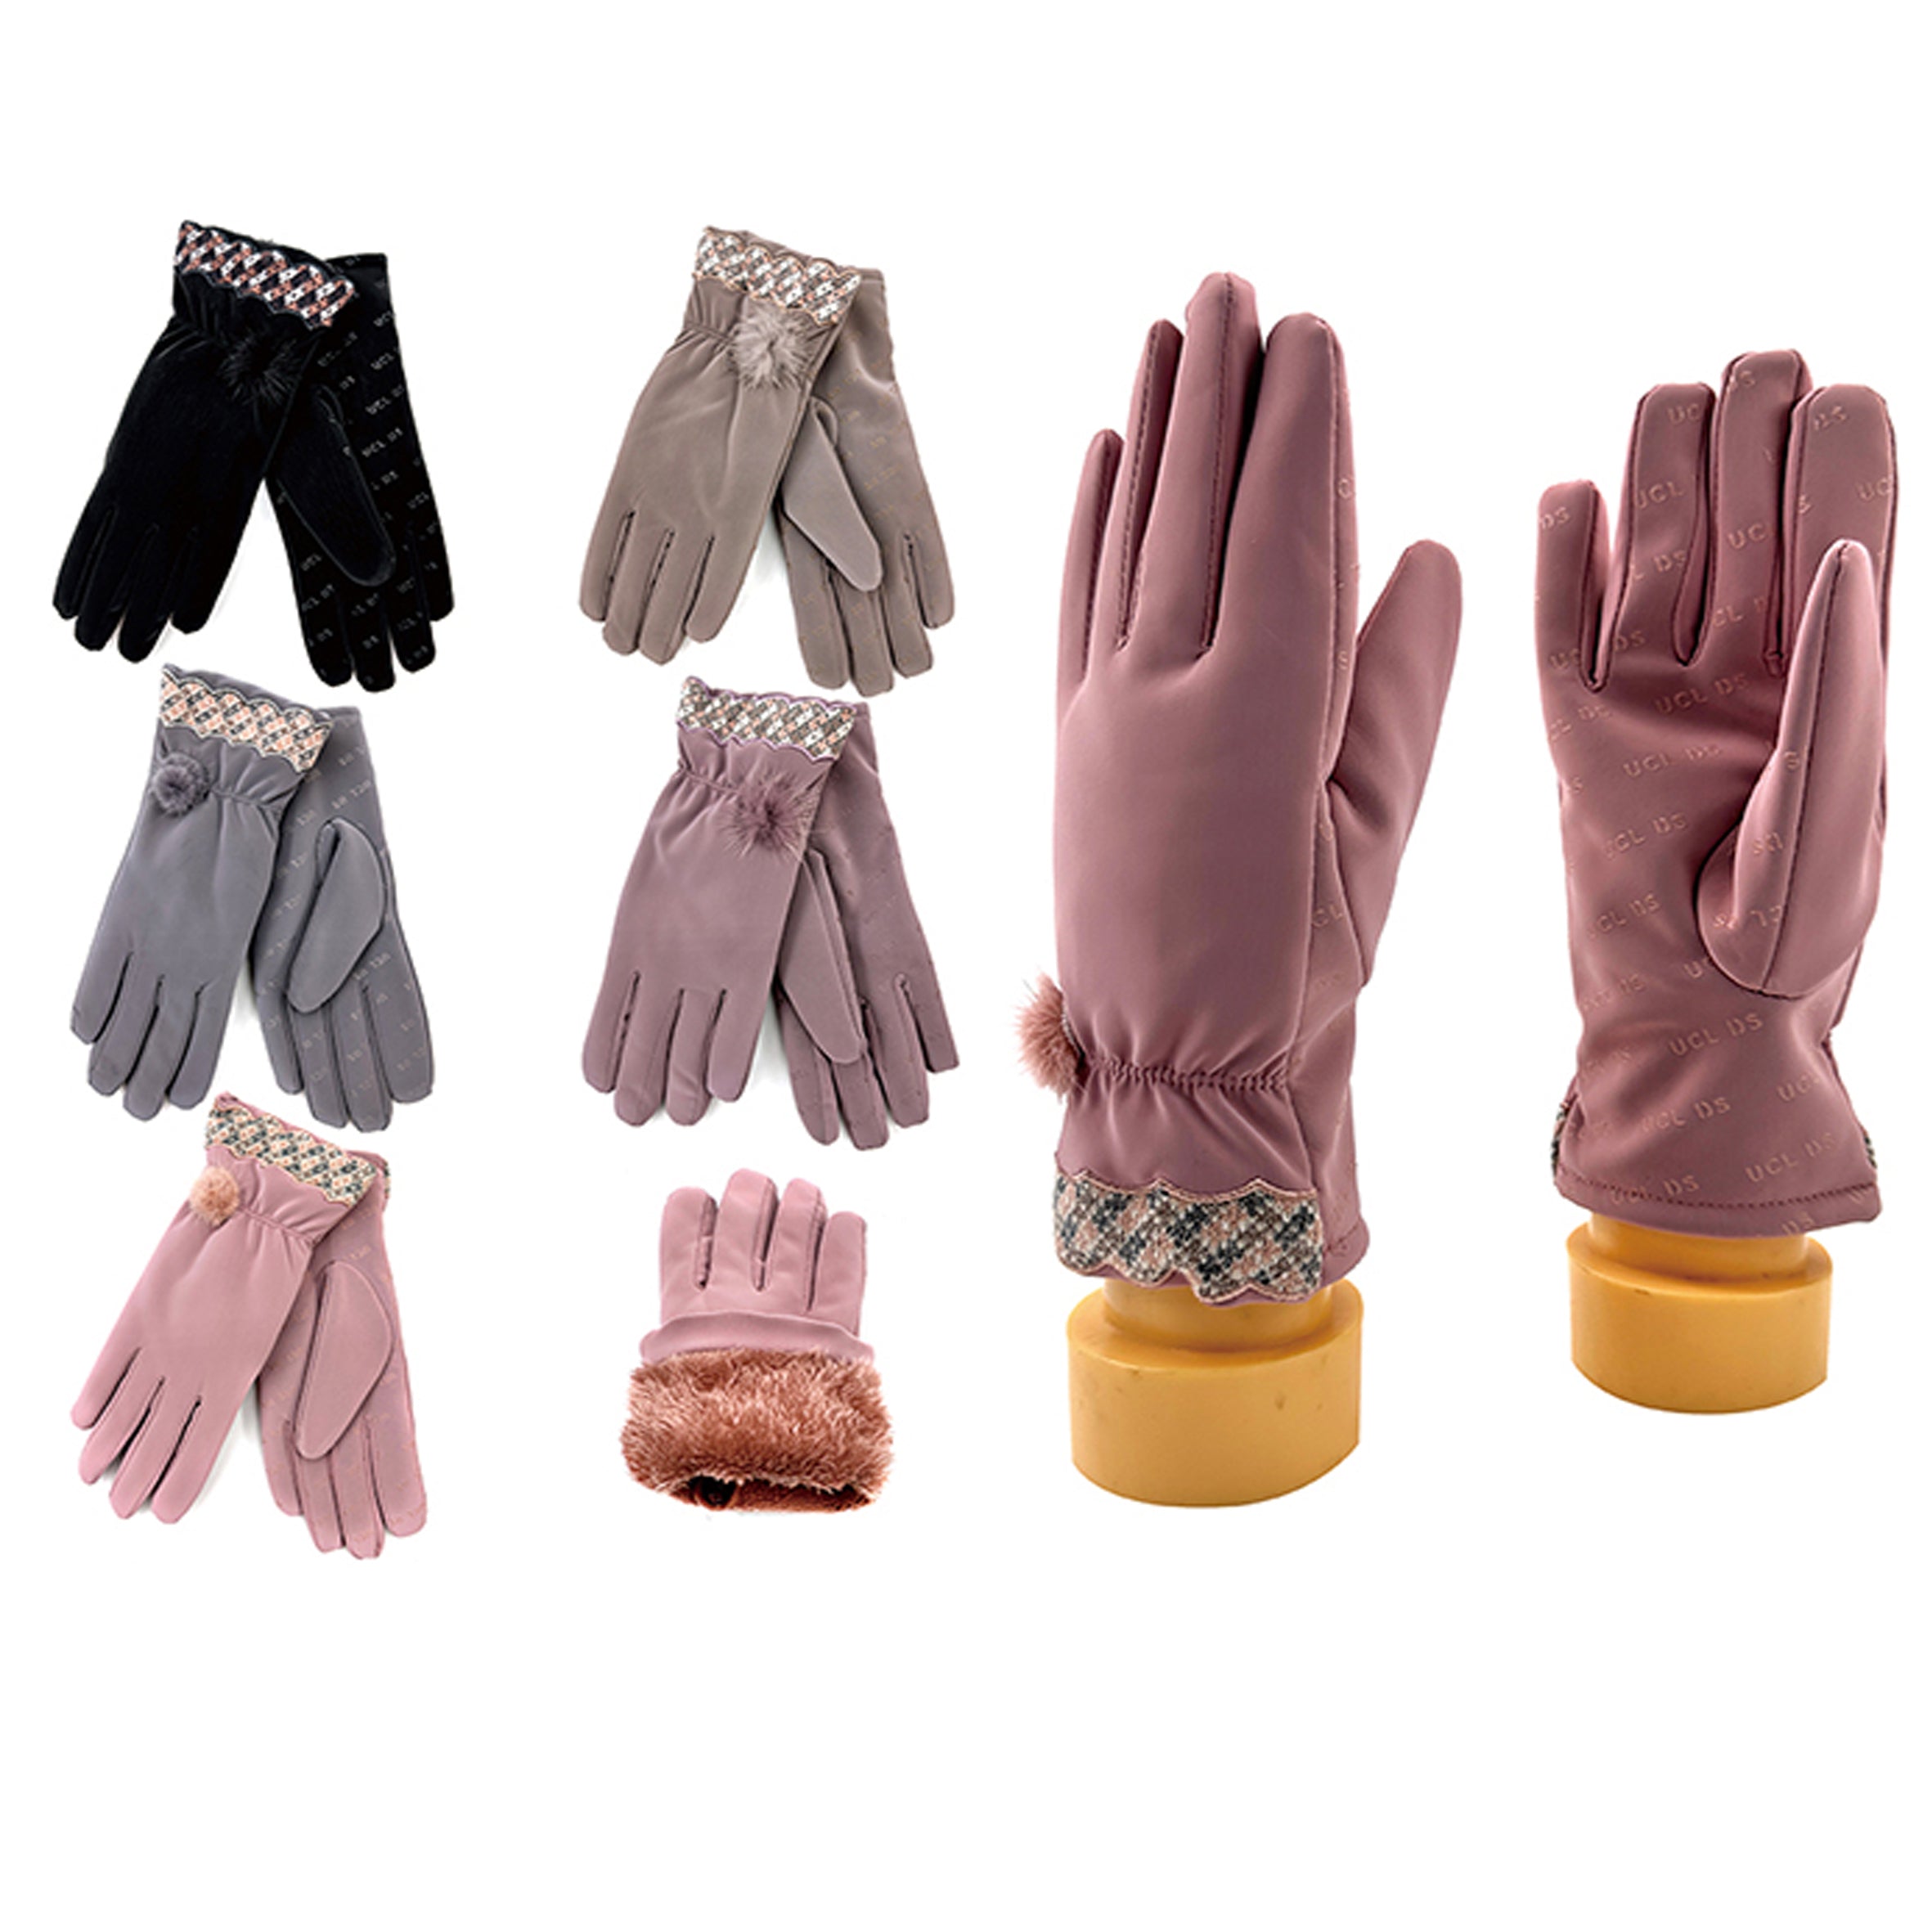 Wholesale CLOTHING Accessories Women's Fur Ball Touch Screen Hand Touch Glove NH248